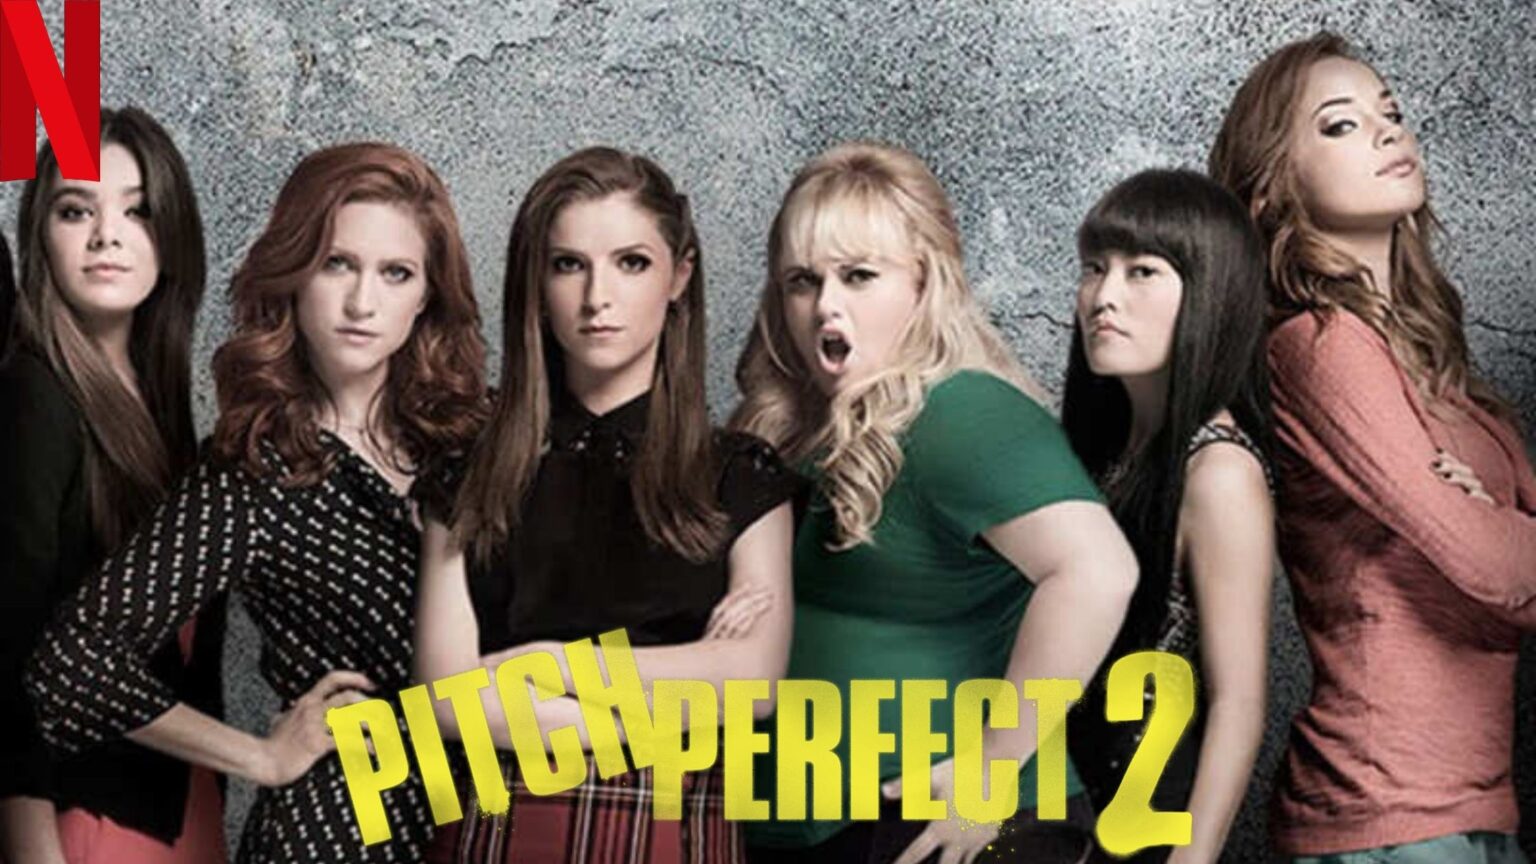 Pitch Perfect 2 (2015) Watch it on NetFlix From Anywhere in the World